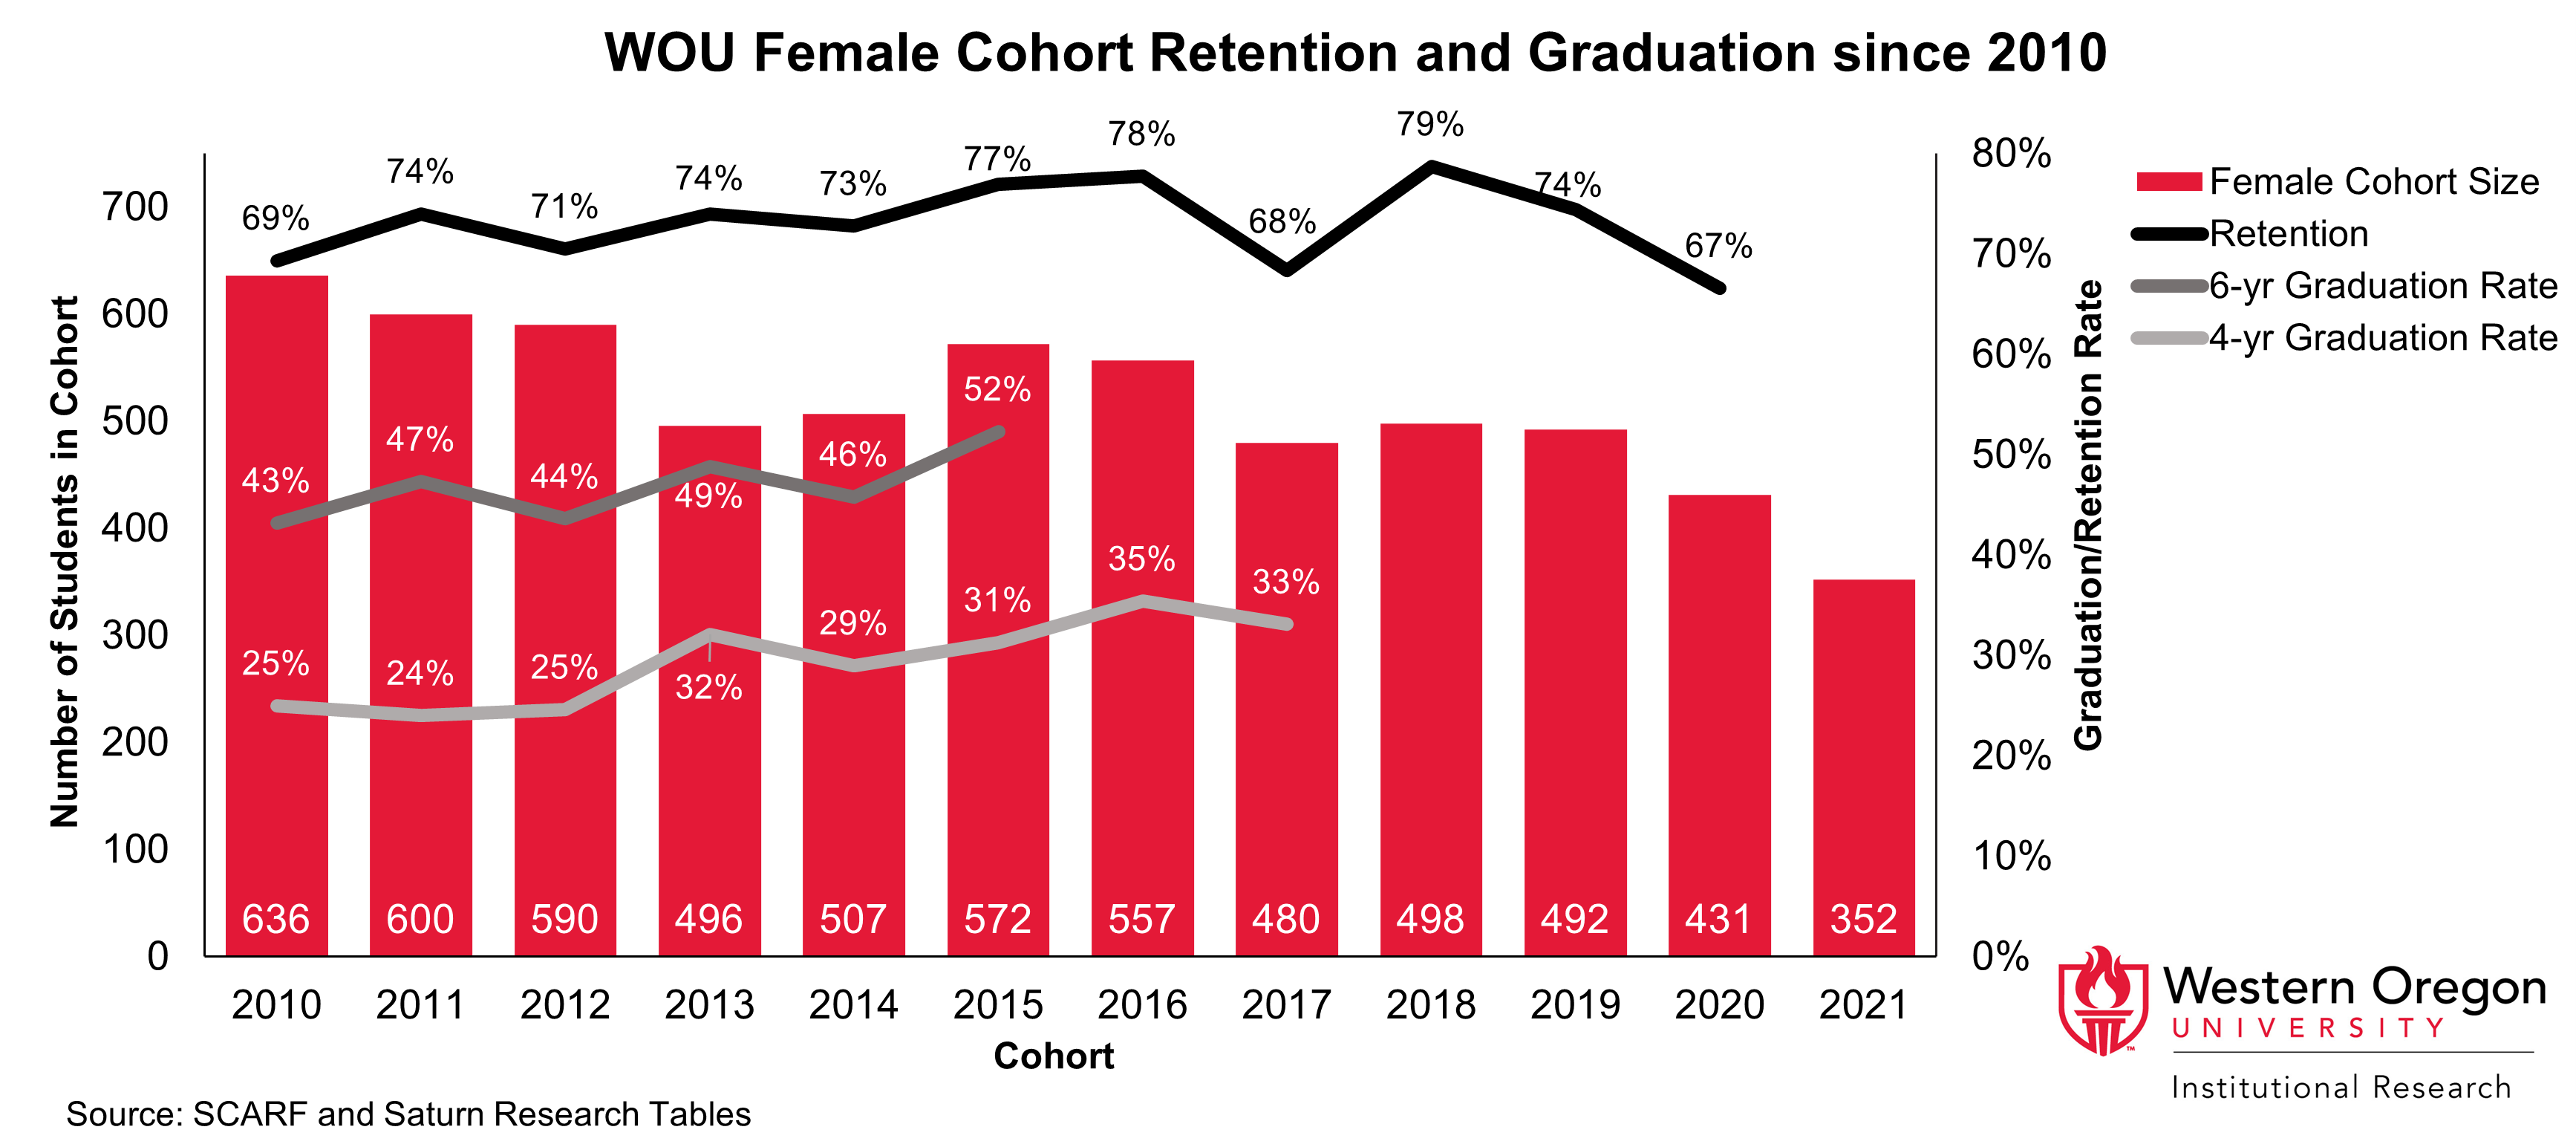 Bar and line graph of retention and 4- and 6-year graduation rates since 2010 for WOU students that are female, showing that graduation rates have been steadily increasing while retention rates have remained largely stable